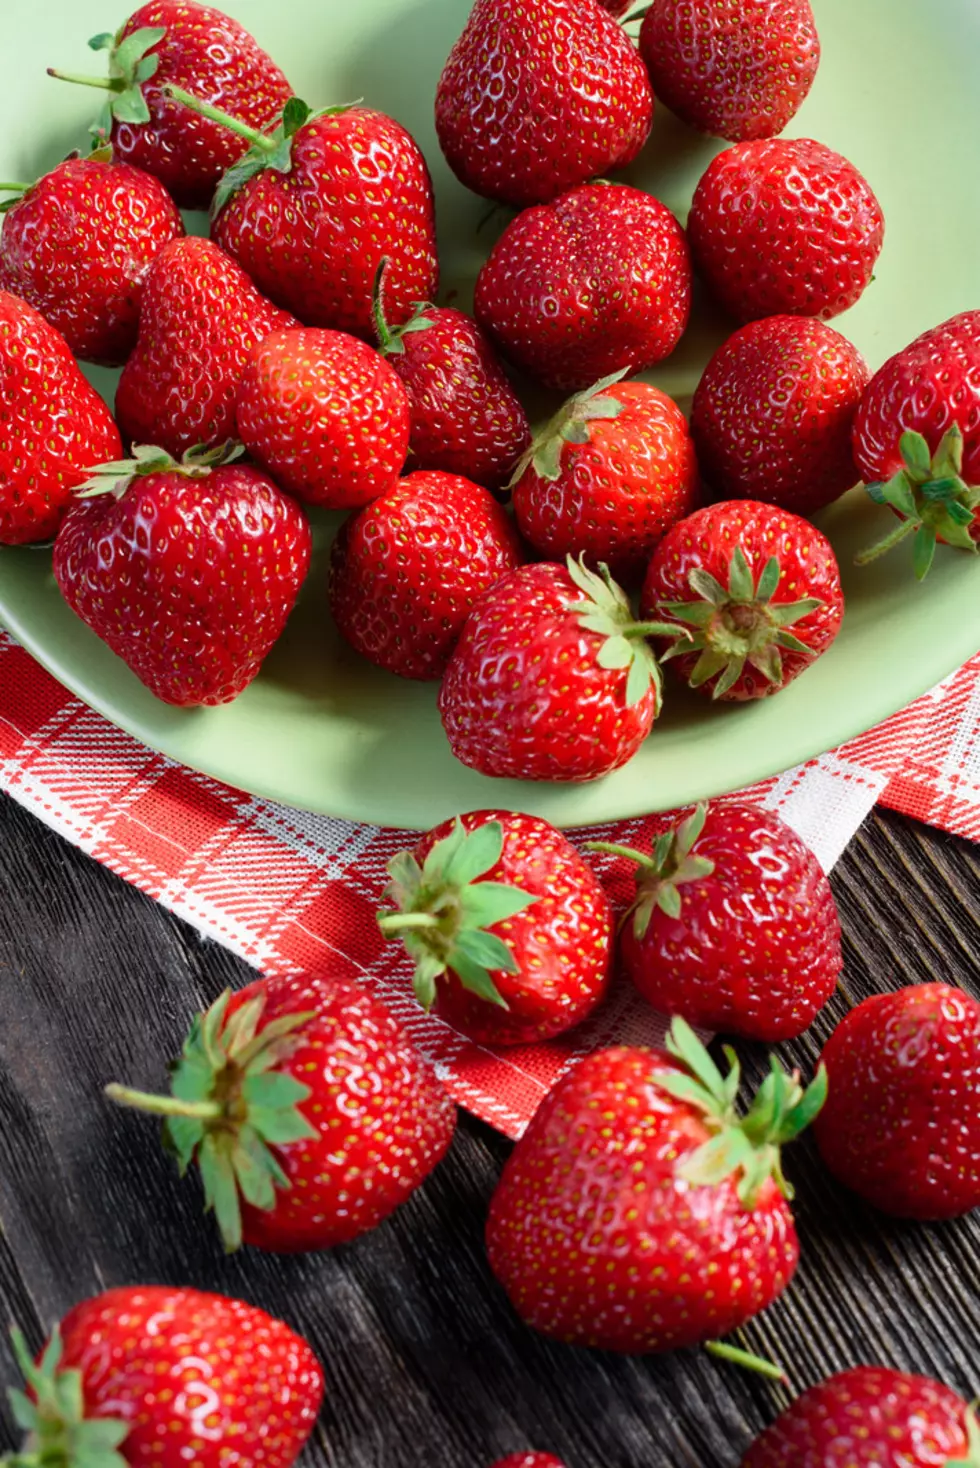 Major Strawberry Recall…Don’t Eat Those Strawberries Until You Read This